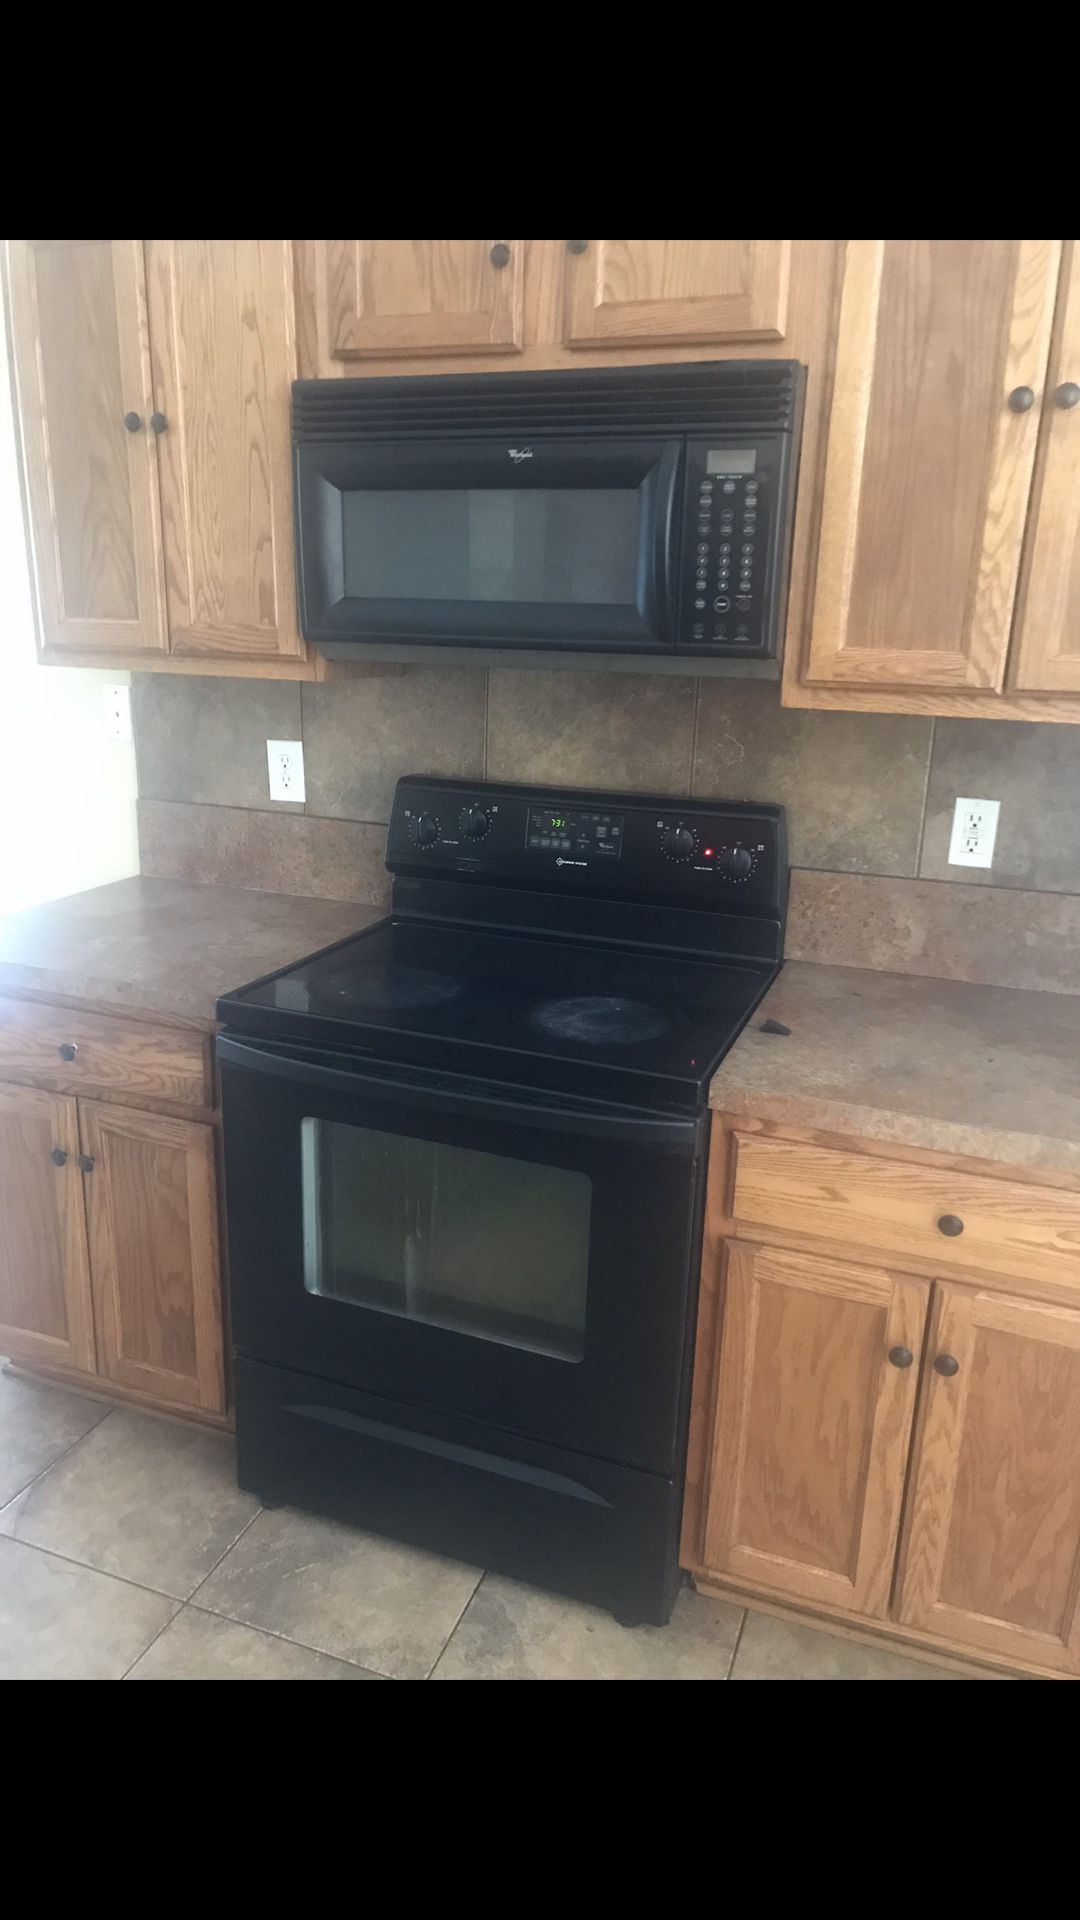 Whirlpool stove & microwave for sale